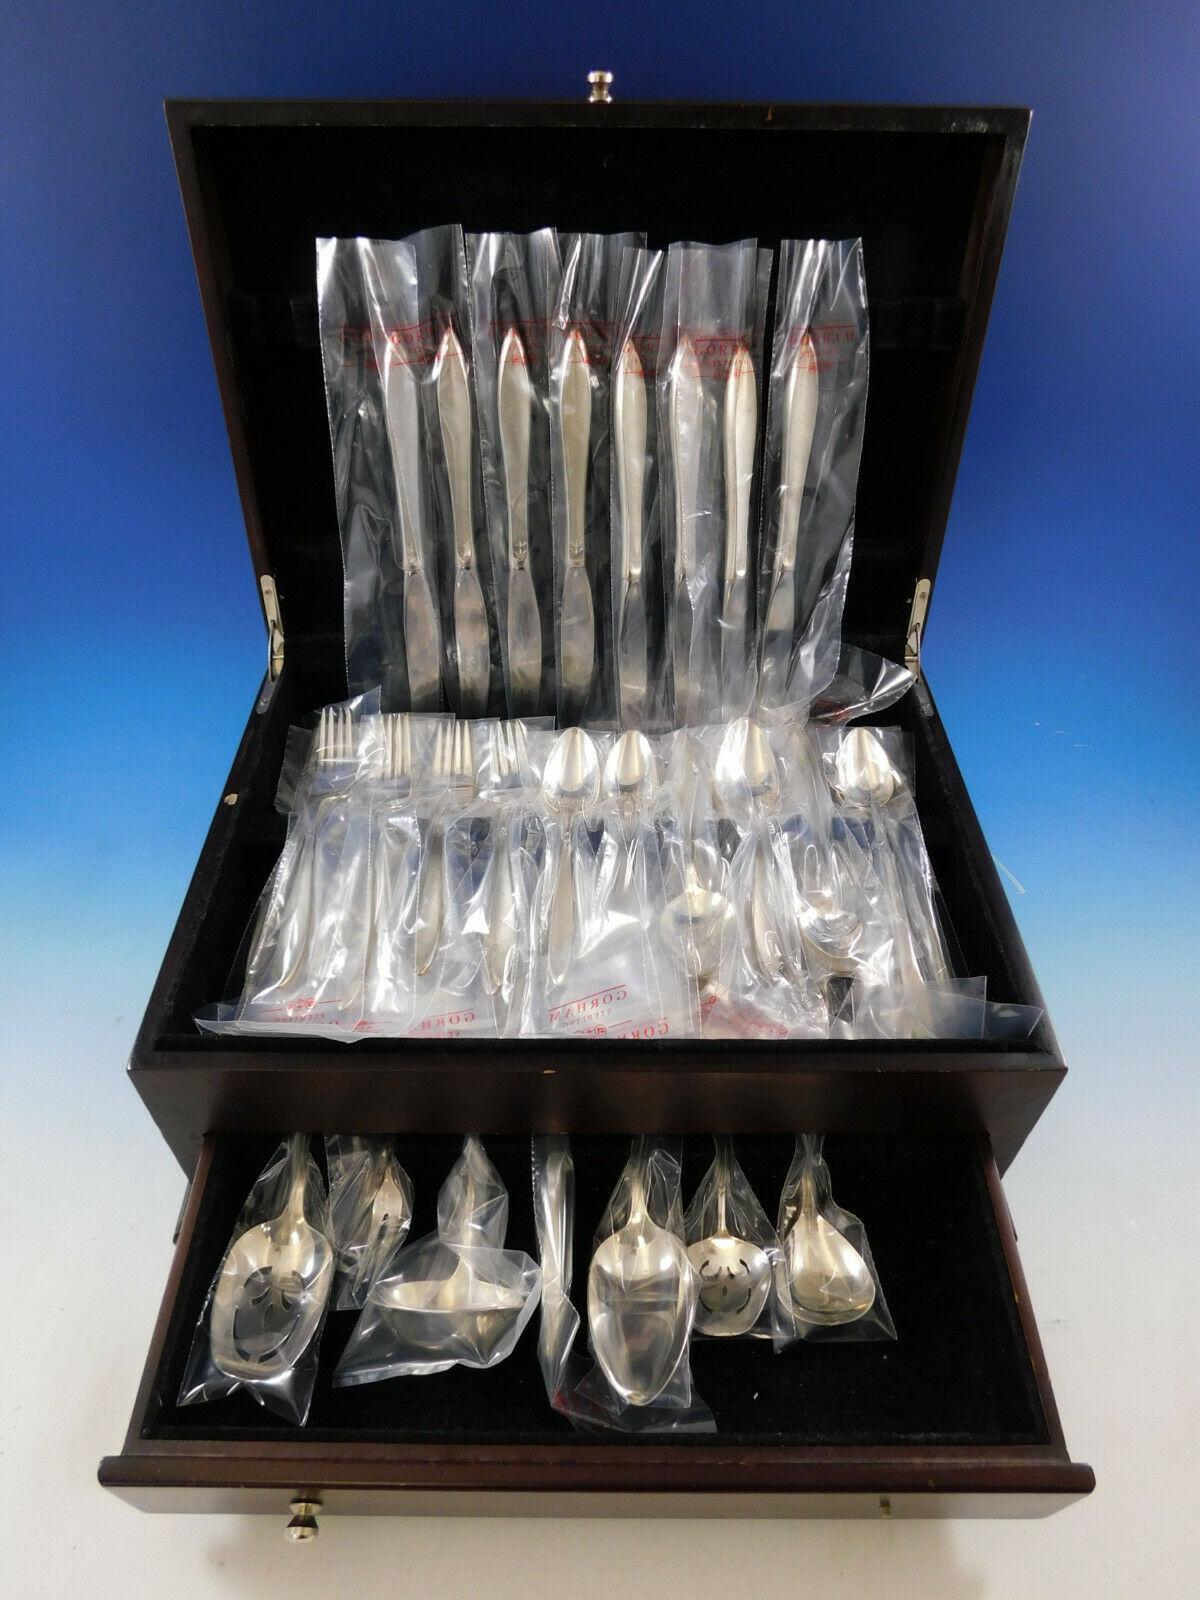 New, unused Gossamer by Gorham sterling silver flatware set with matte Florentine finish, 55 pieces. This set includes:

8 knives, 8 7/8